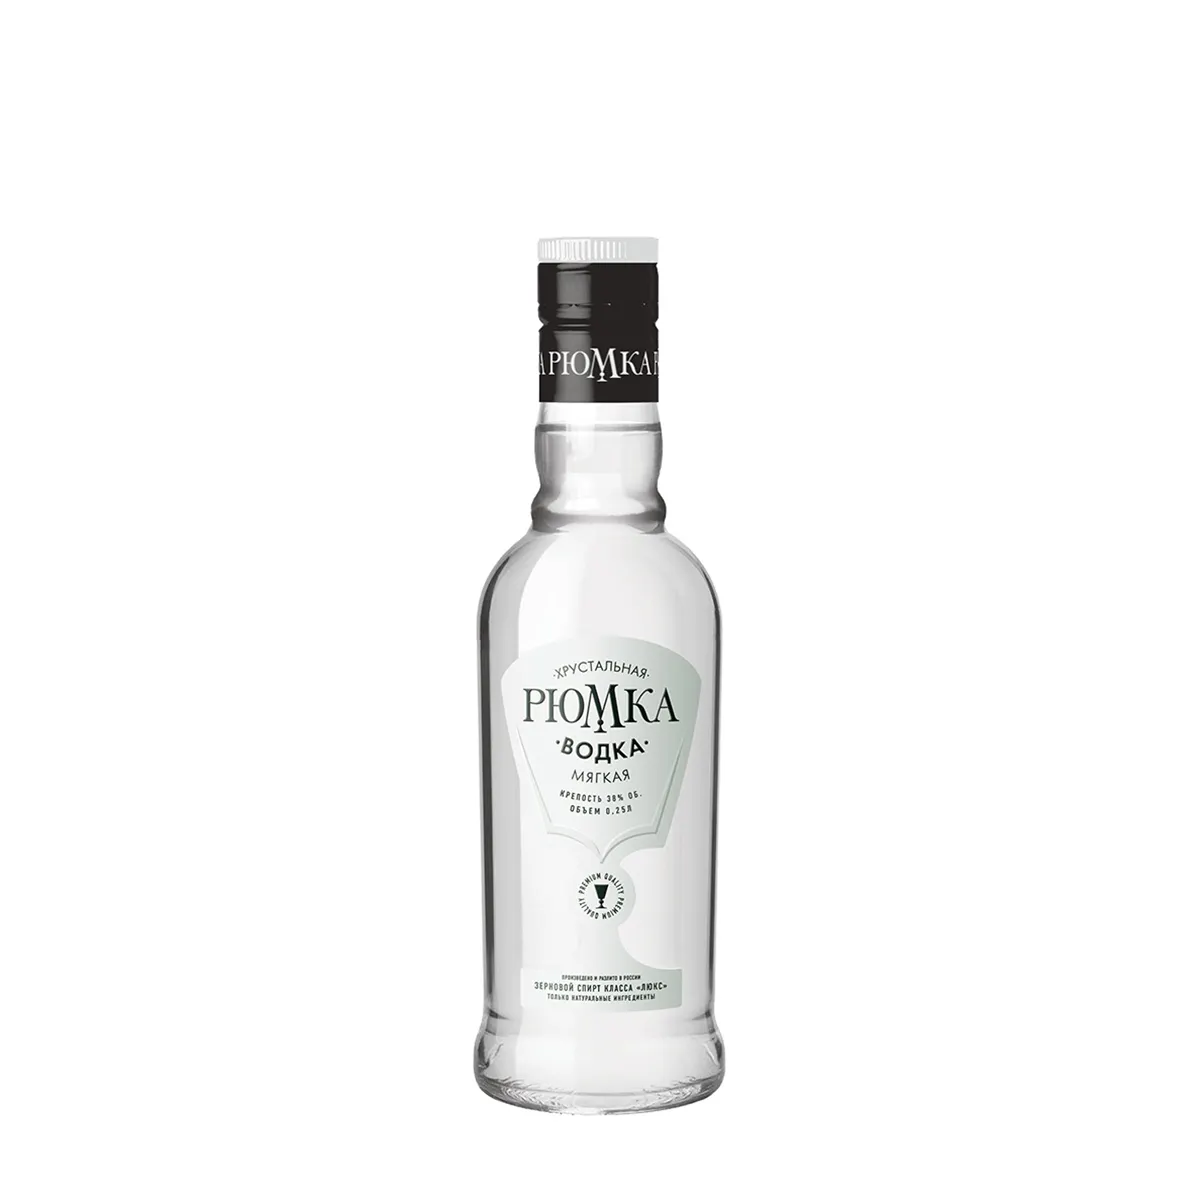 100 % Premium quality 250 ml 40% Soft strong and clean taste 'Crystal wineglass' strong grain vodka for drinking